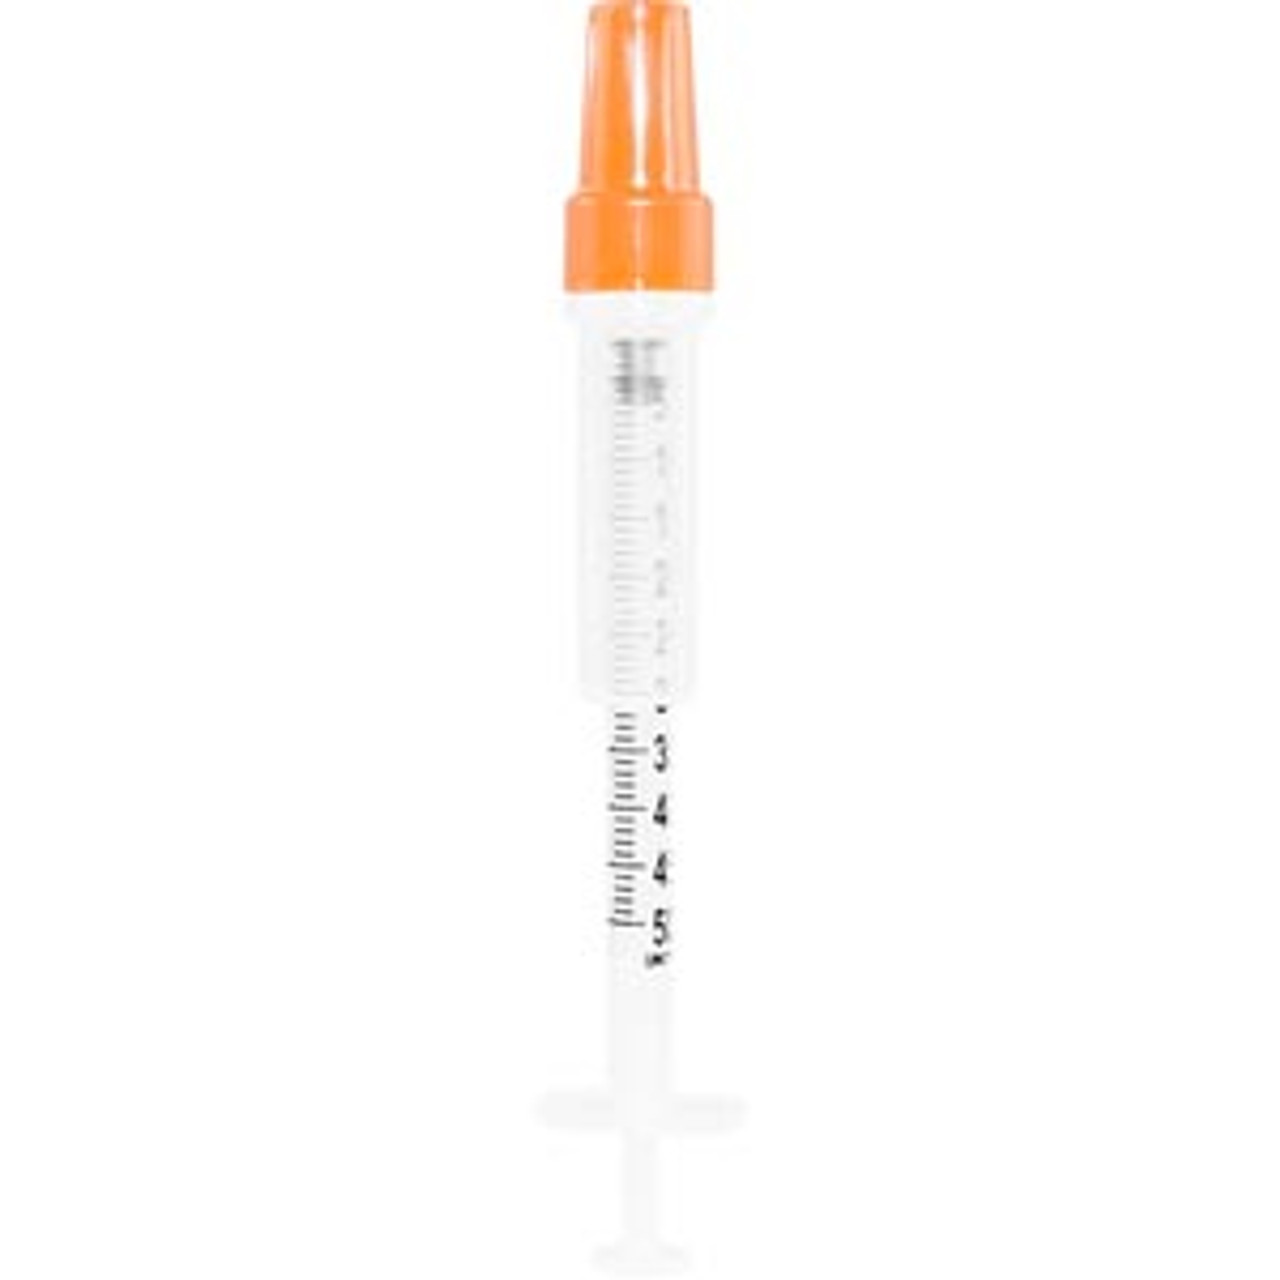 Sol Millennium Medical Inc sg Insulin Safety Syringe 0 5ml Fixed Needle 31g X 5 16 In U 100 Insulin Only 100 Bx 8 Bx Cs Sold As Cs